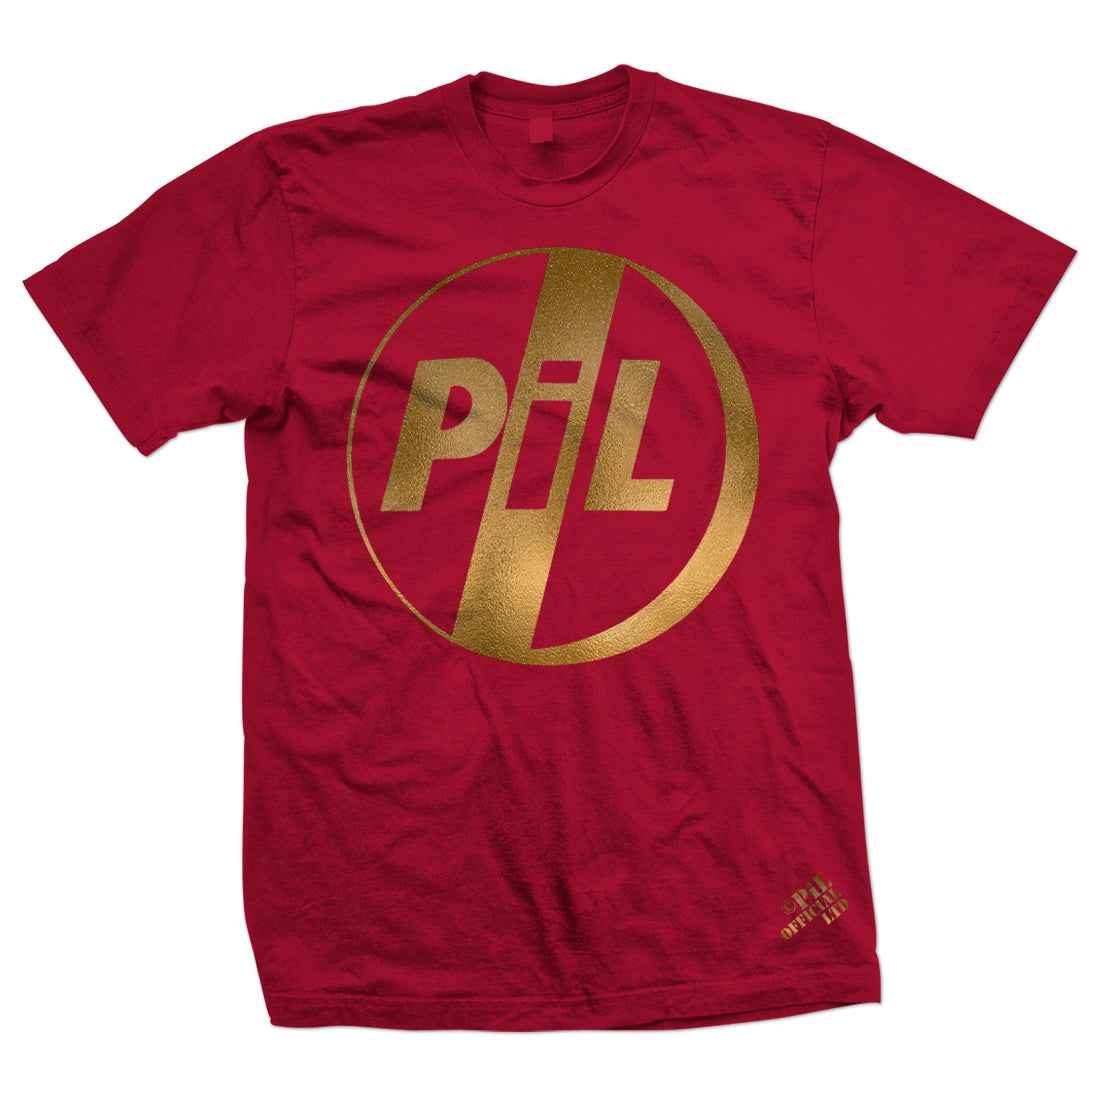 Undercover xPIL public image limited tee-